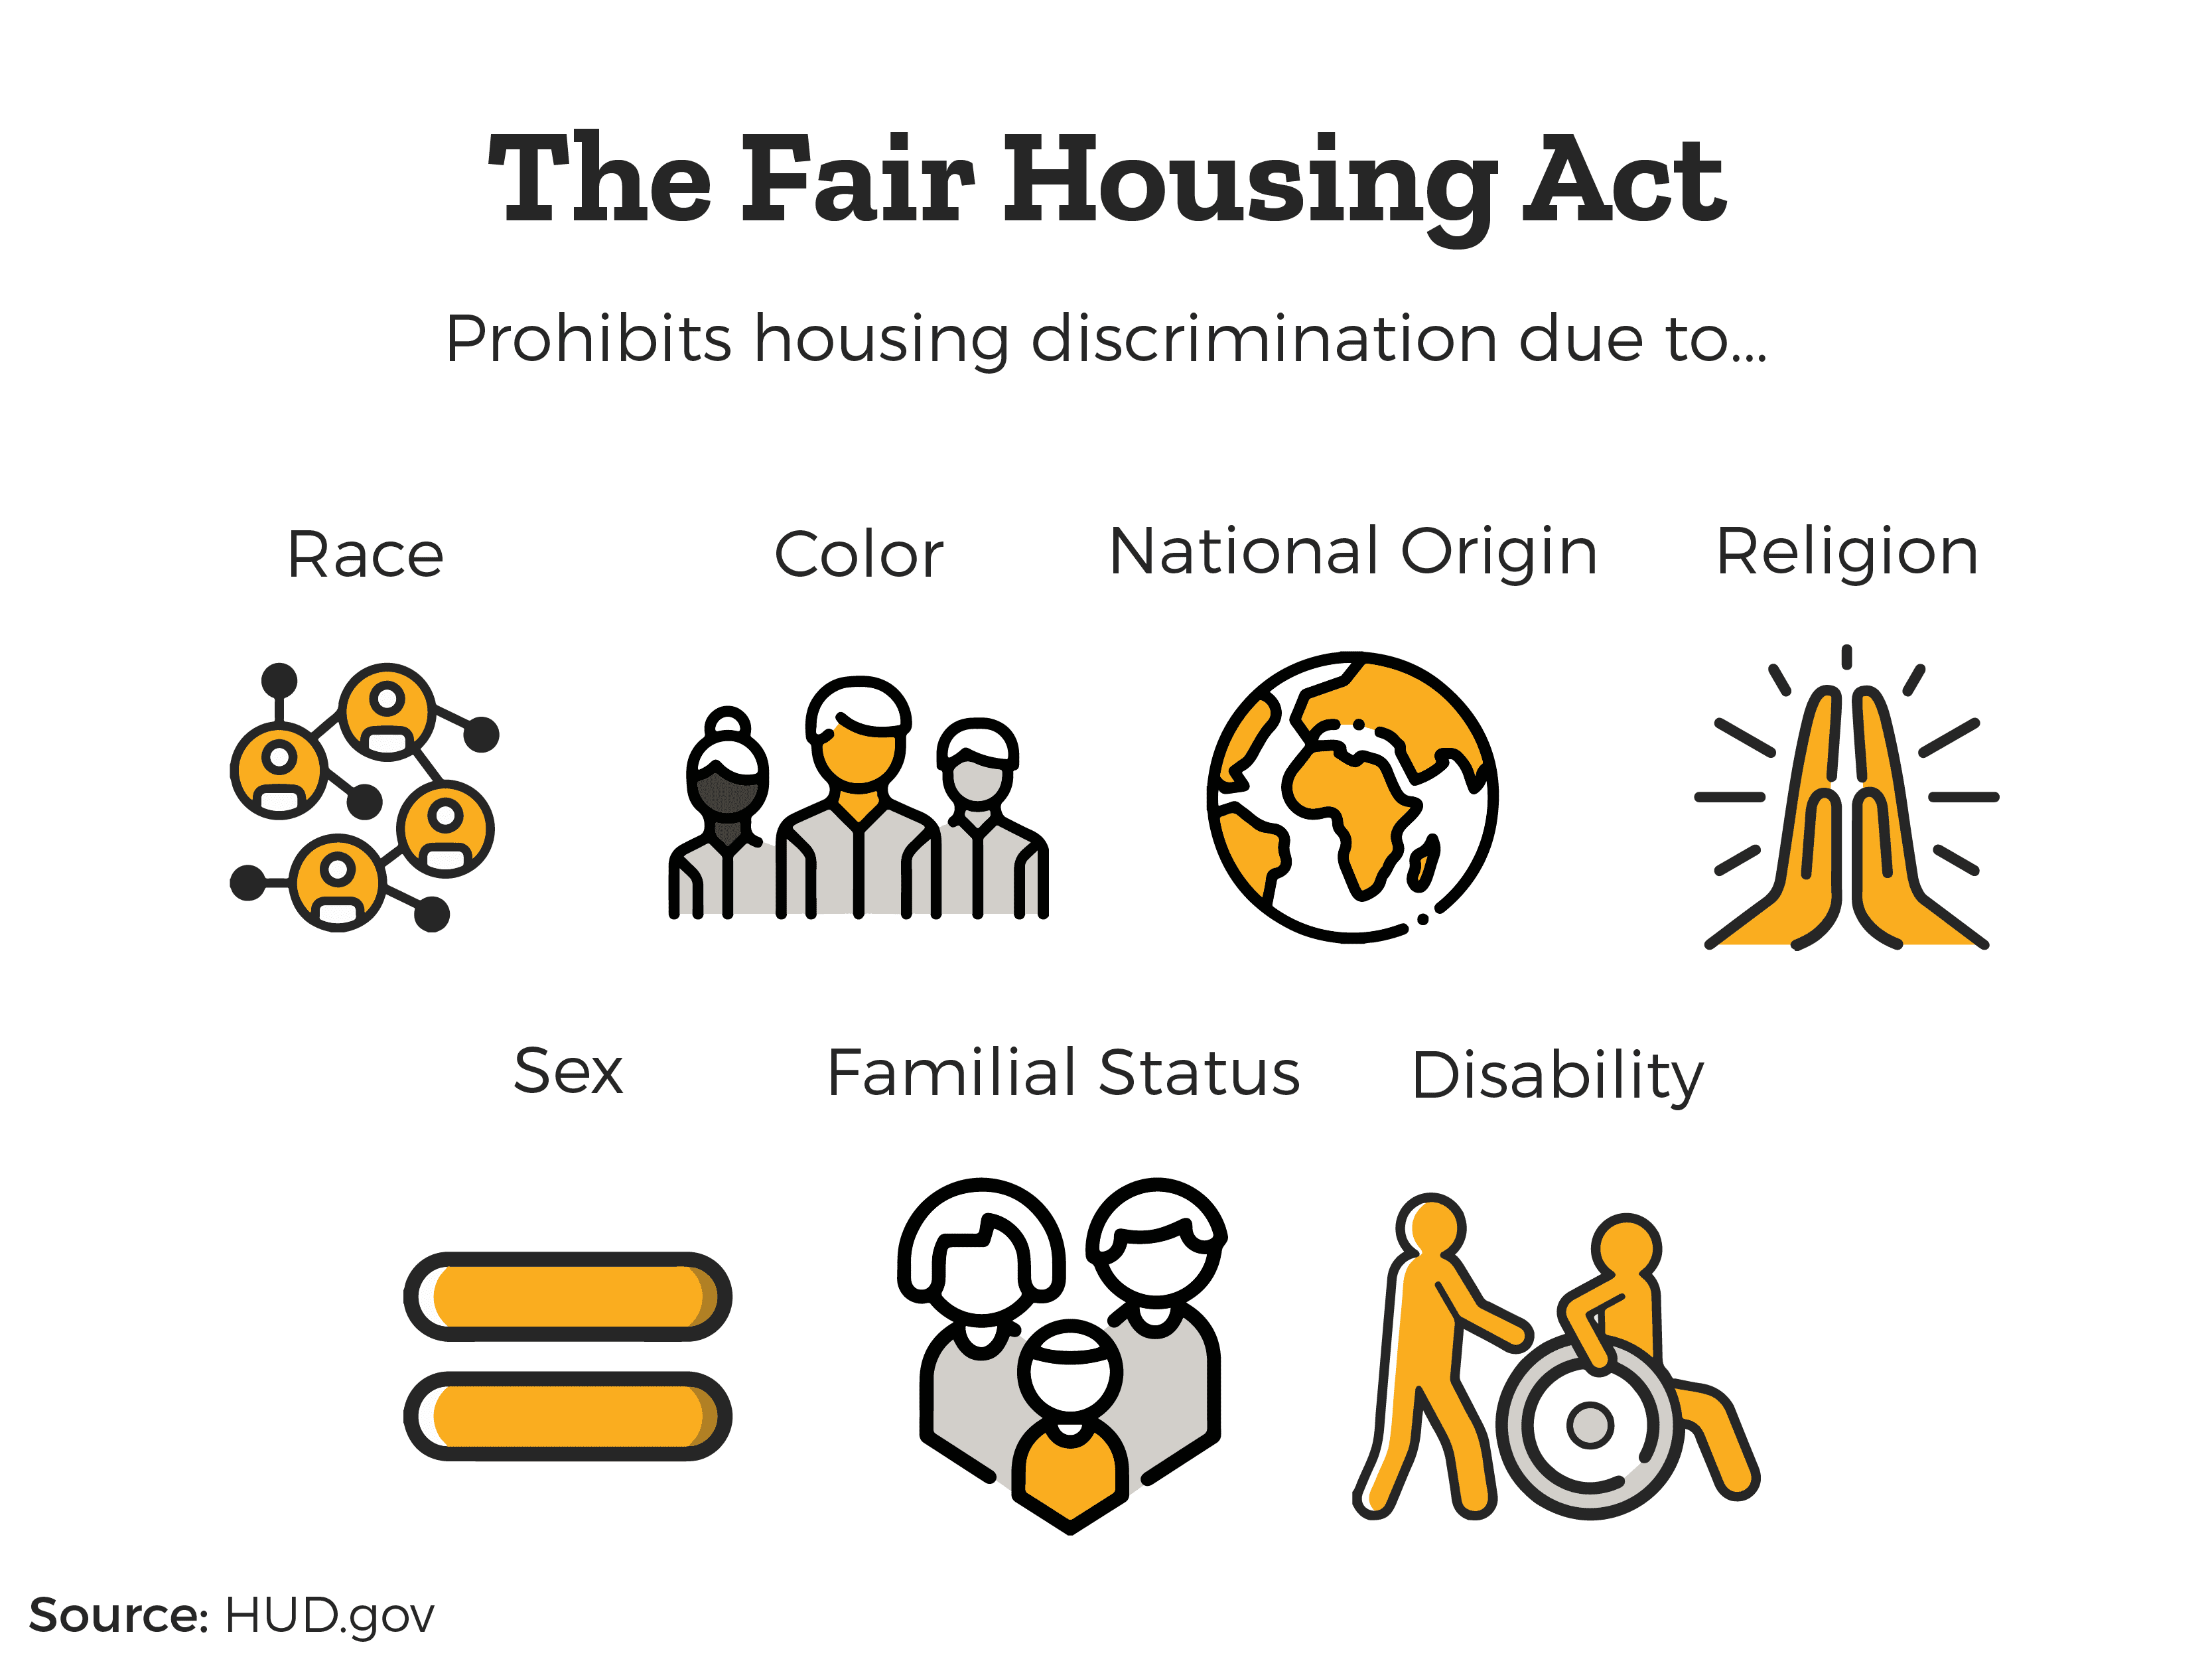 Explanation of The Fair Housing Act which prohibits housing discrimination due to race, color, national origin, religion, sex, familial status, and disability according to HUD.gov.